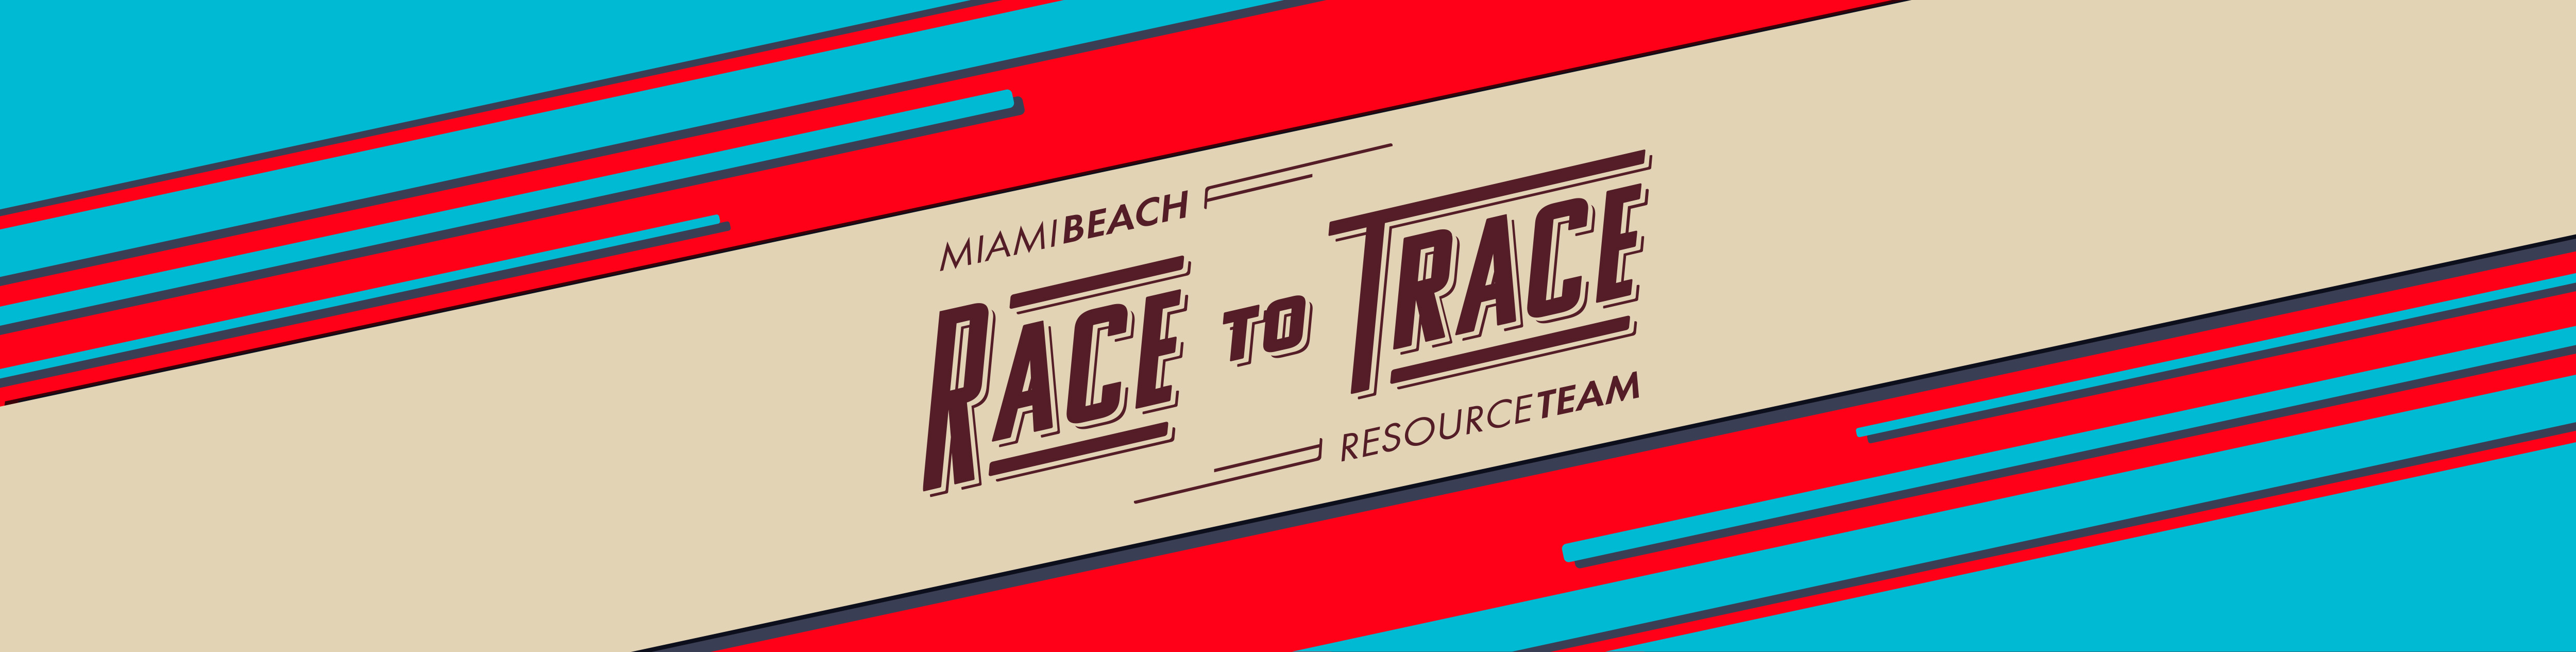 Miami Beach Race to Trace Resource Team banner